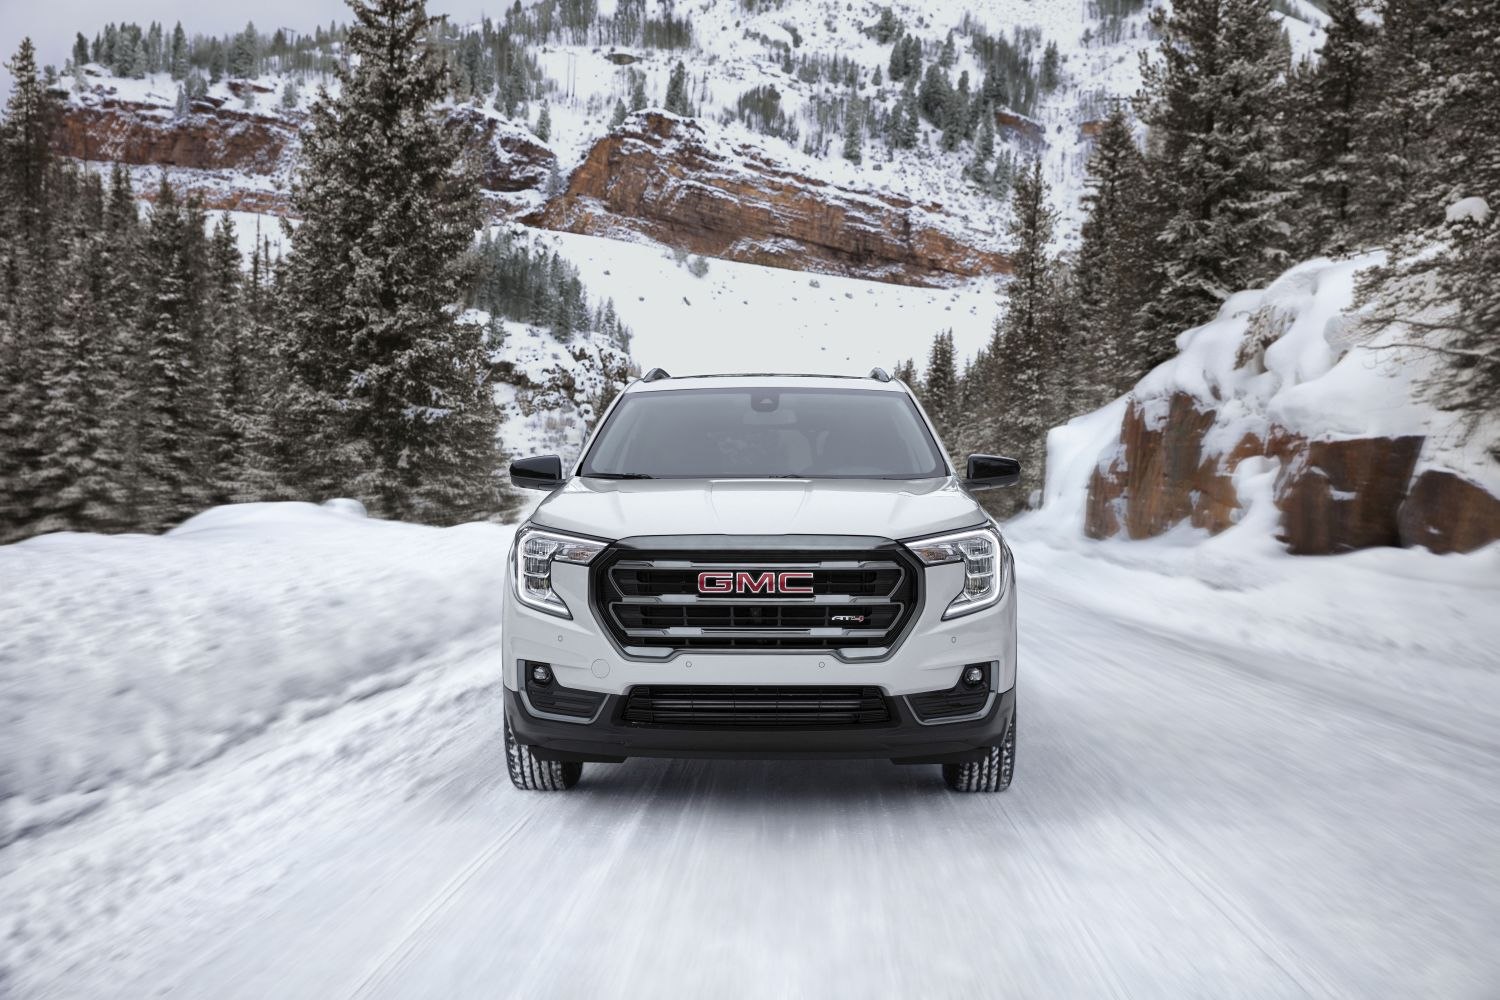 GMC Terrain technical specifications and fuel economy